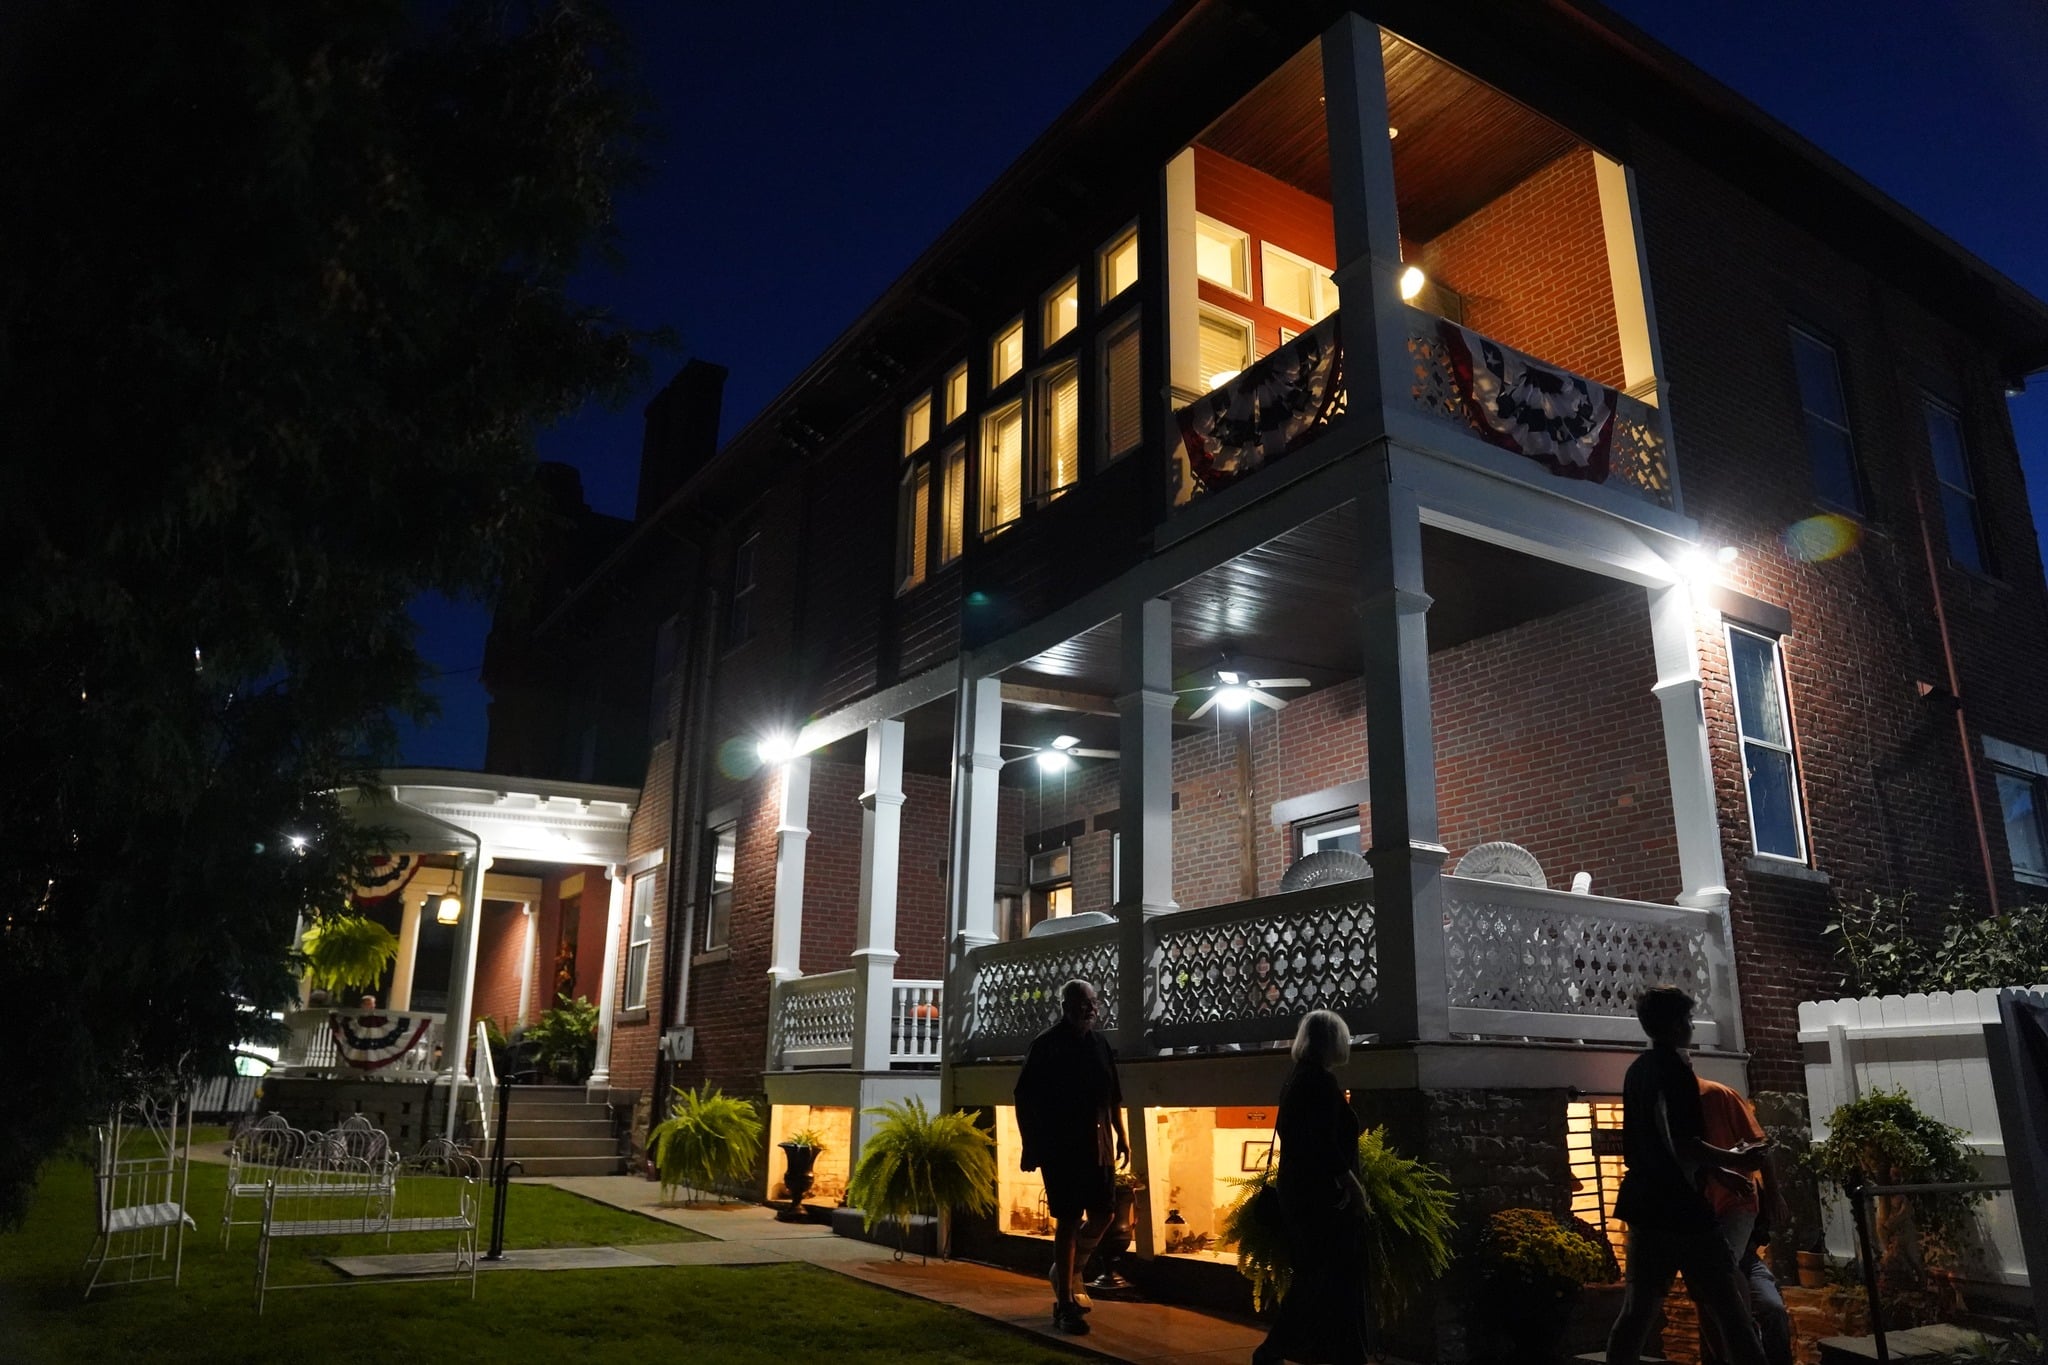 Photograph of the exterior of The Denny House at night.